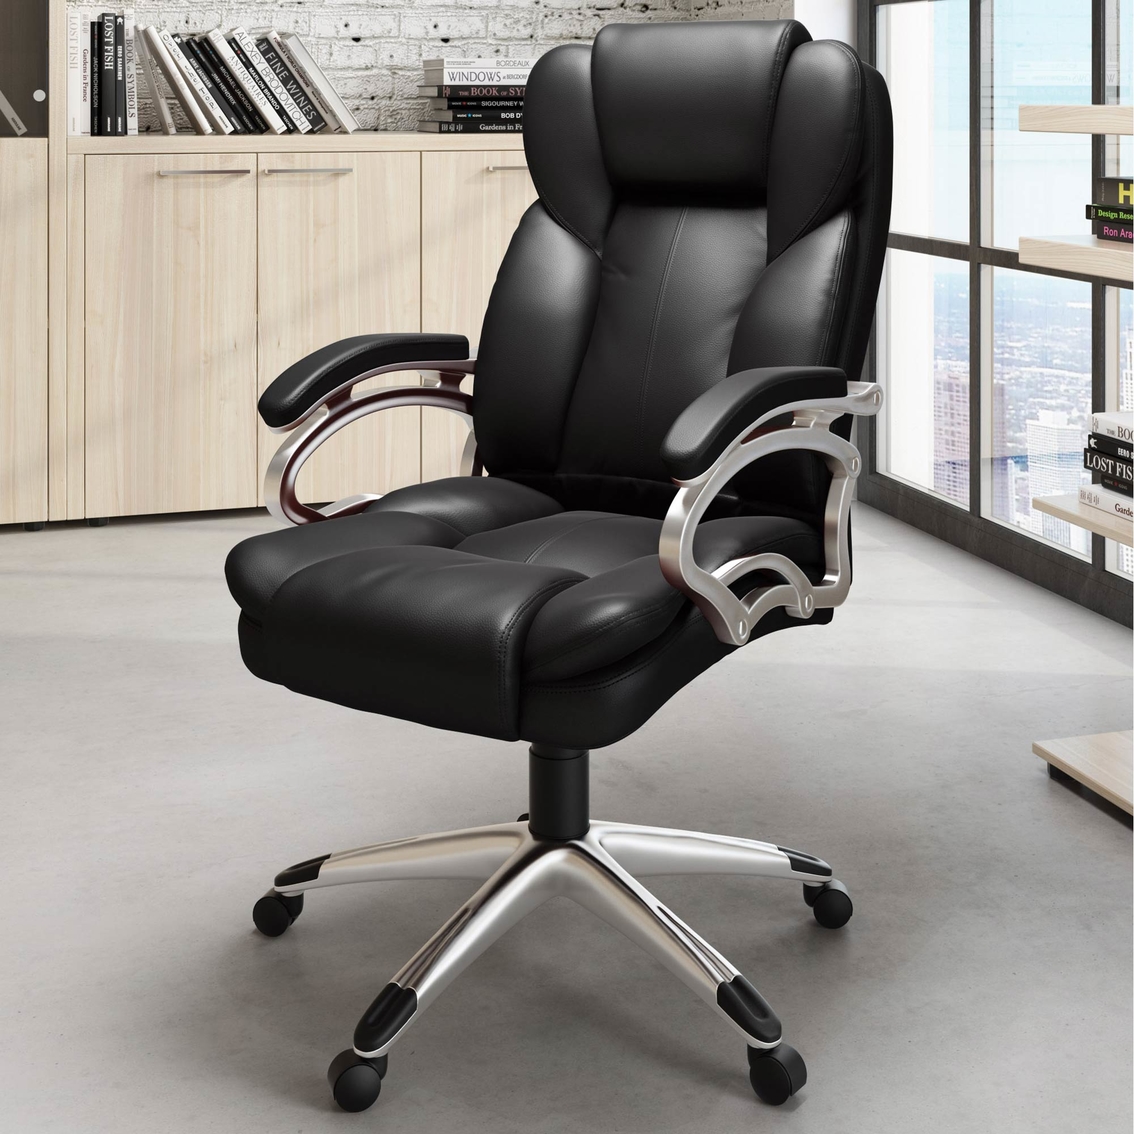 CorLiving Leatherette Executive Office Chair - Image 4 of 4